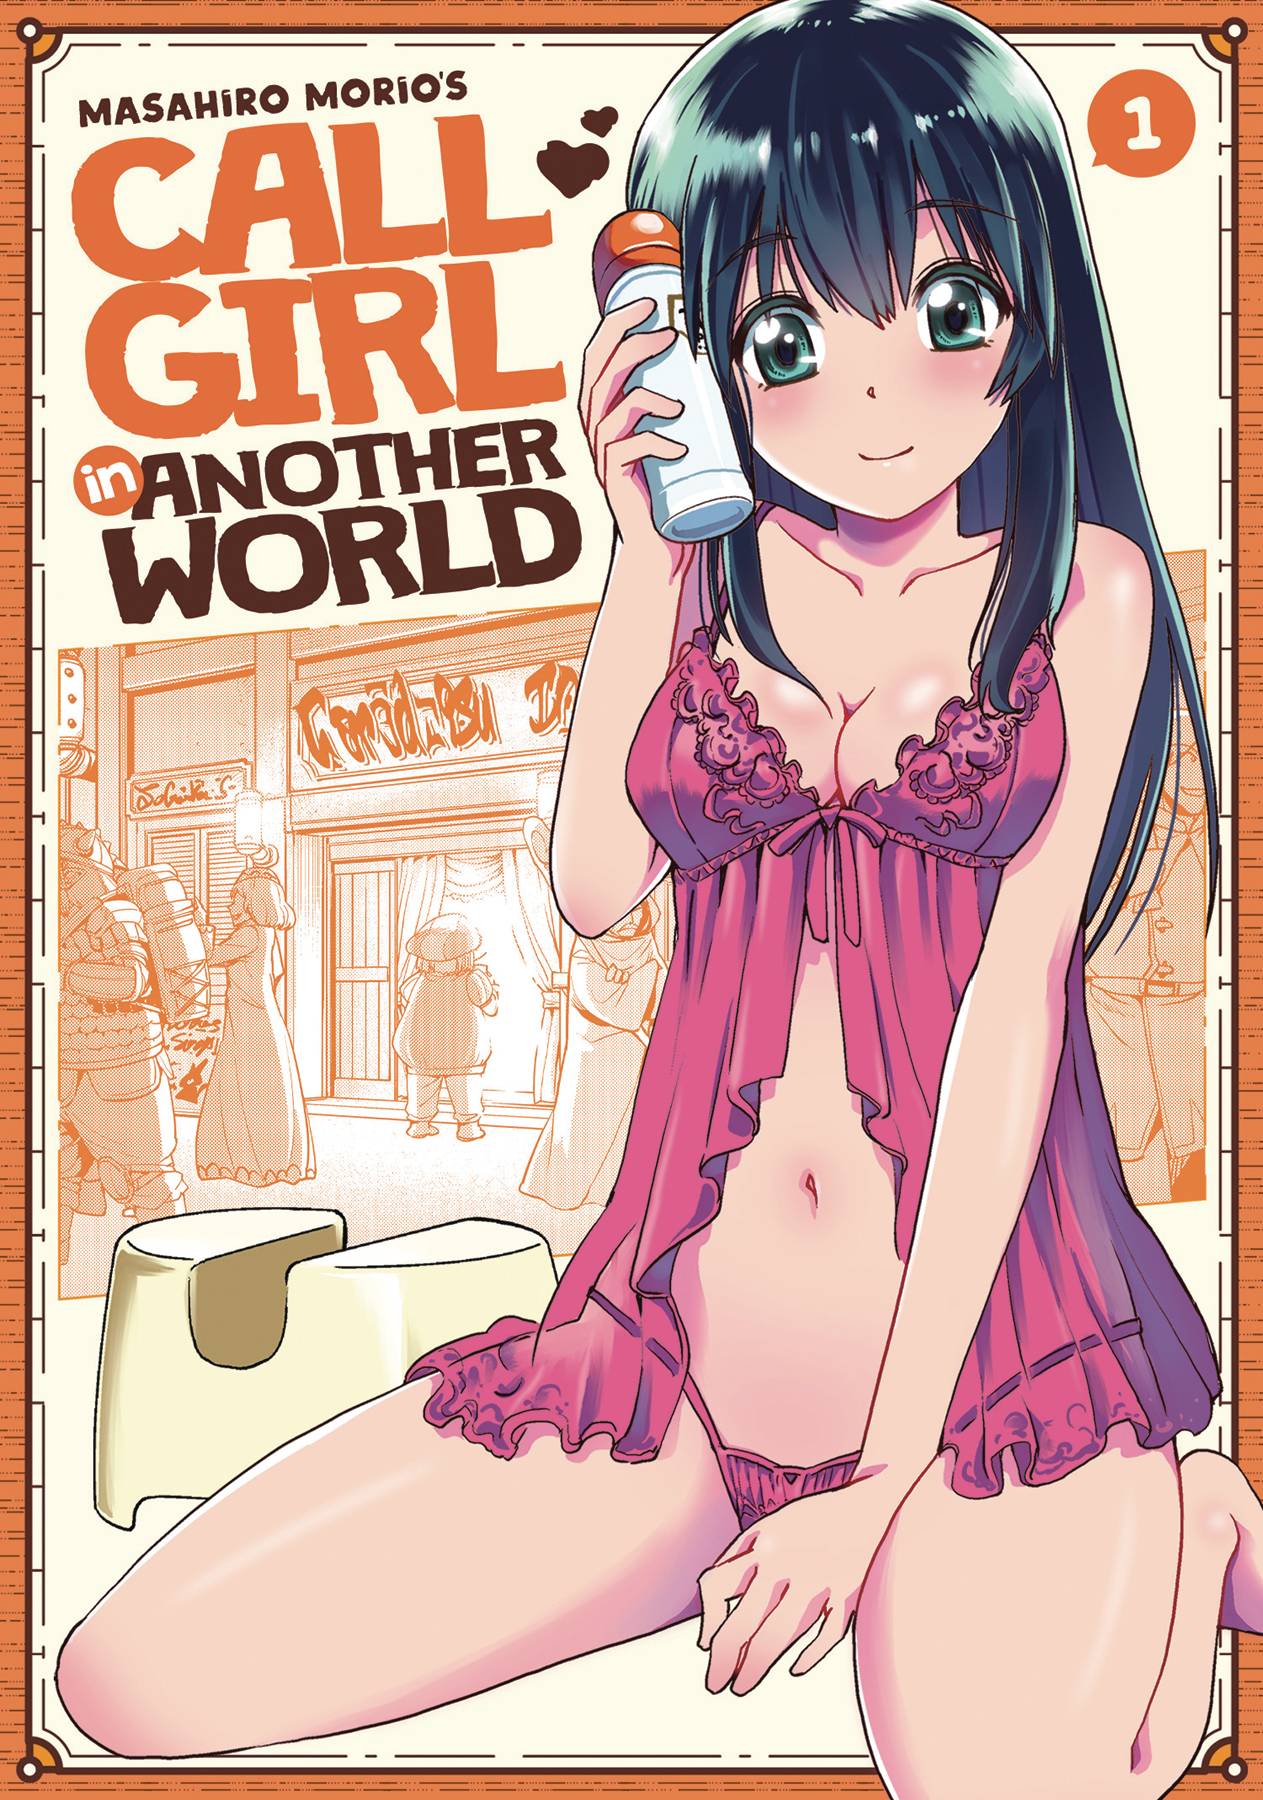 CALL GIRL IN ANOTHER WORLD VOL 01 (MR)